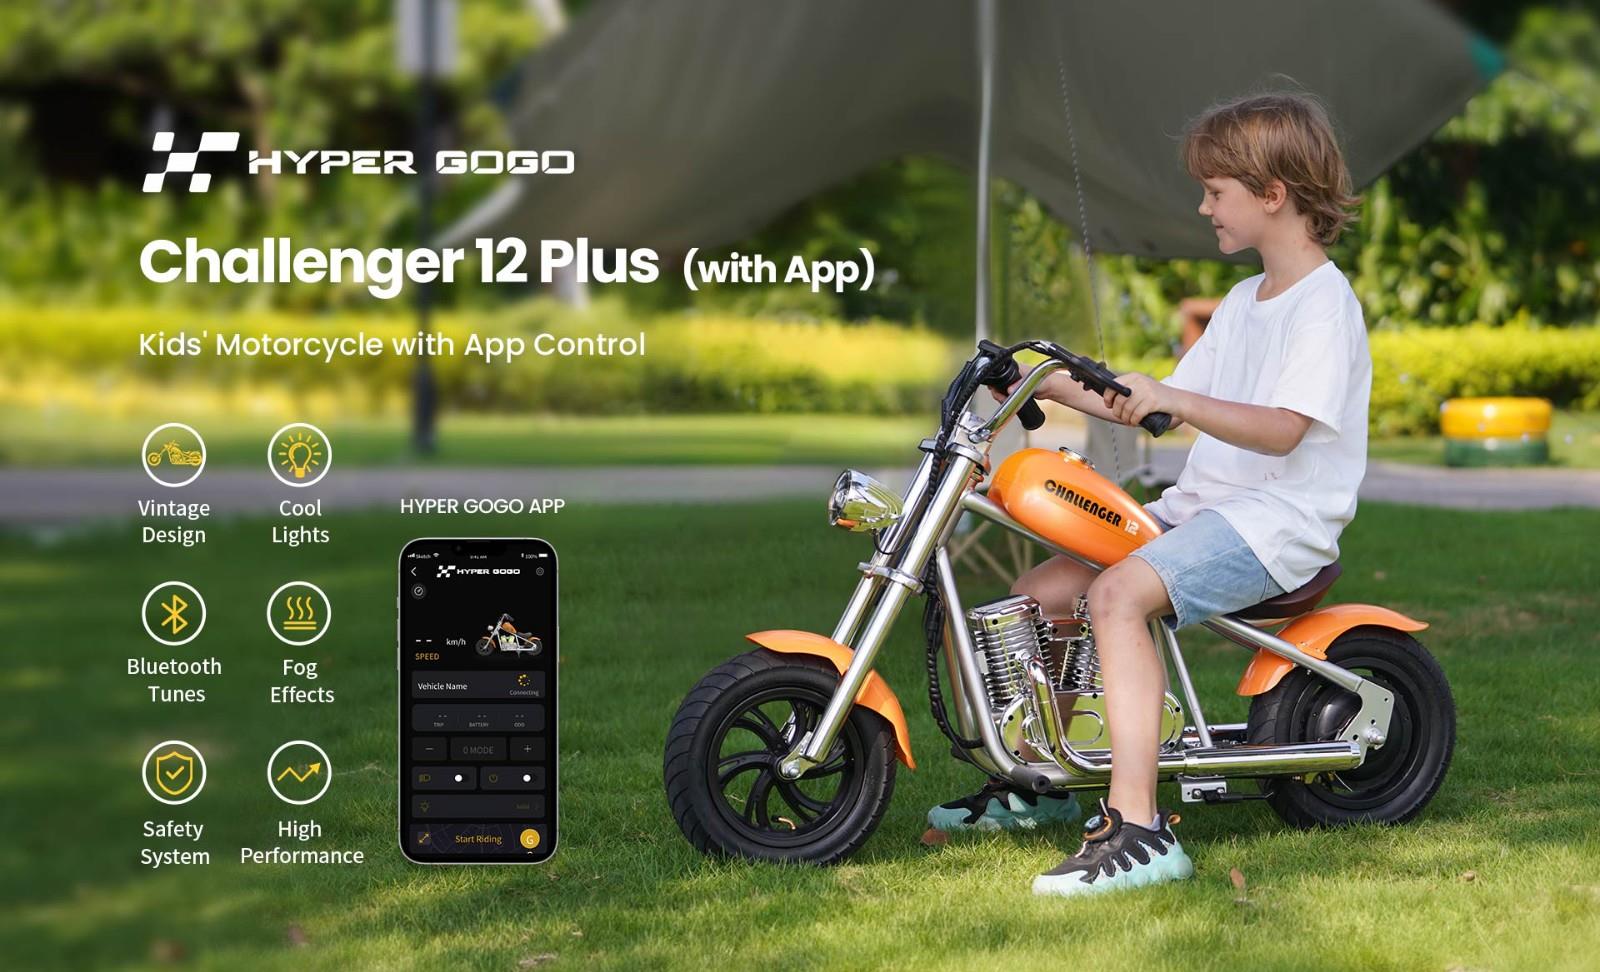 Hyper GOGO Challenger 12 Plus Electric Motorcycle with App for Kids, 12 x 3 Tires, 160W, 5.2Ah, Bluetooth Speaker - Orange